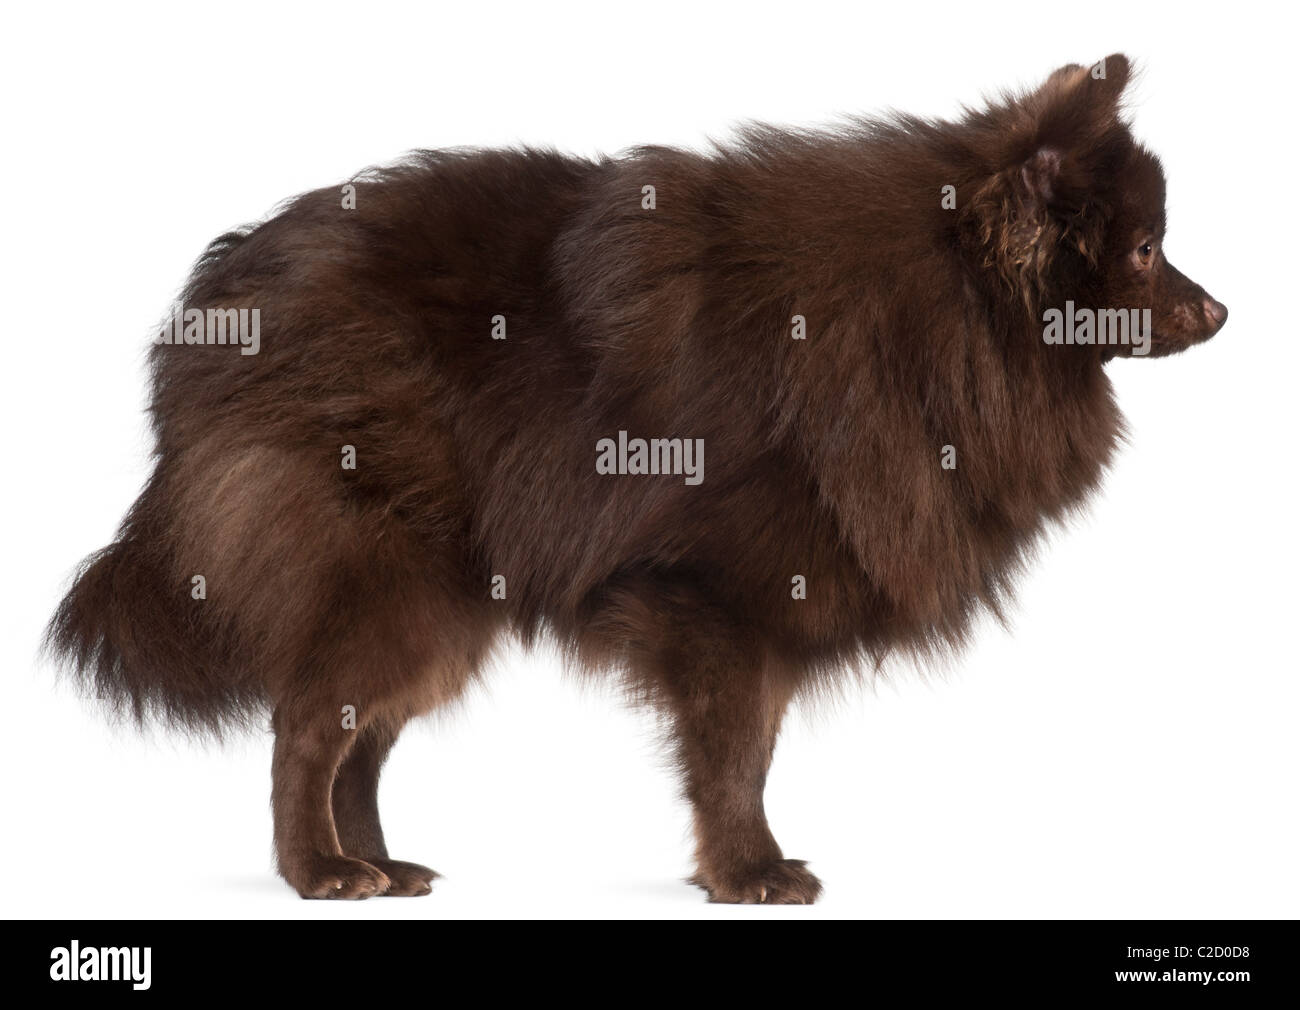 Profile of brown dog standing in front of white background Stock Photo